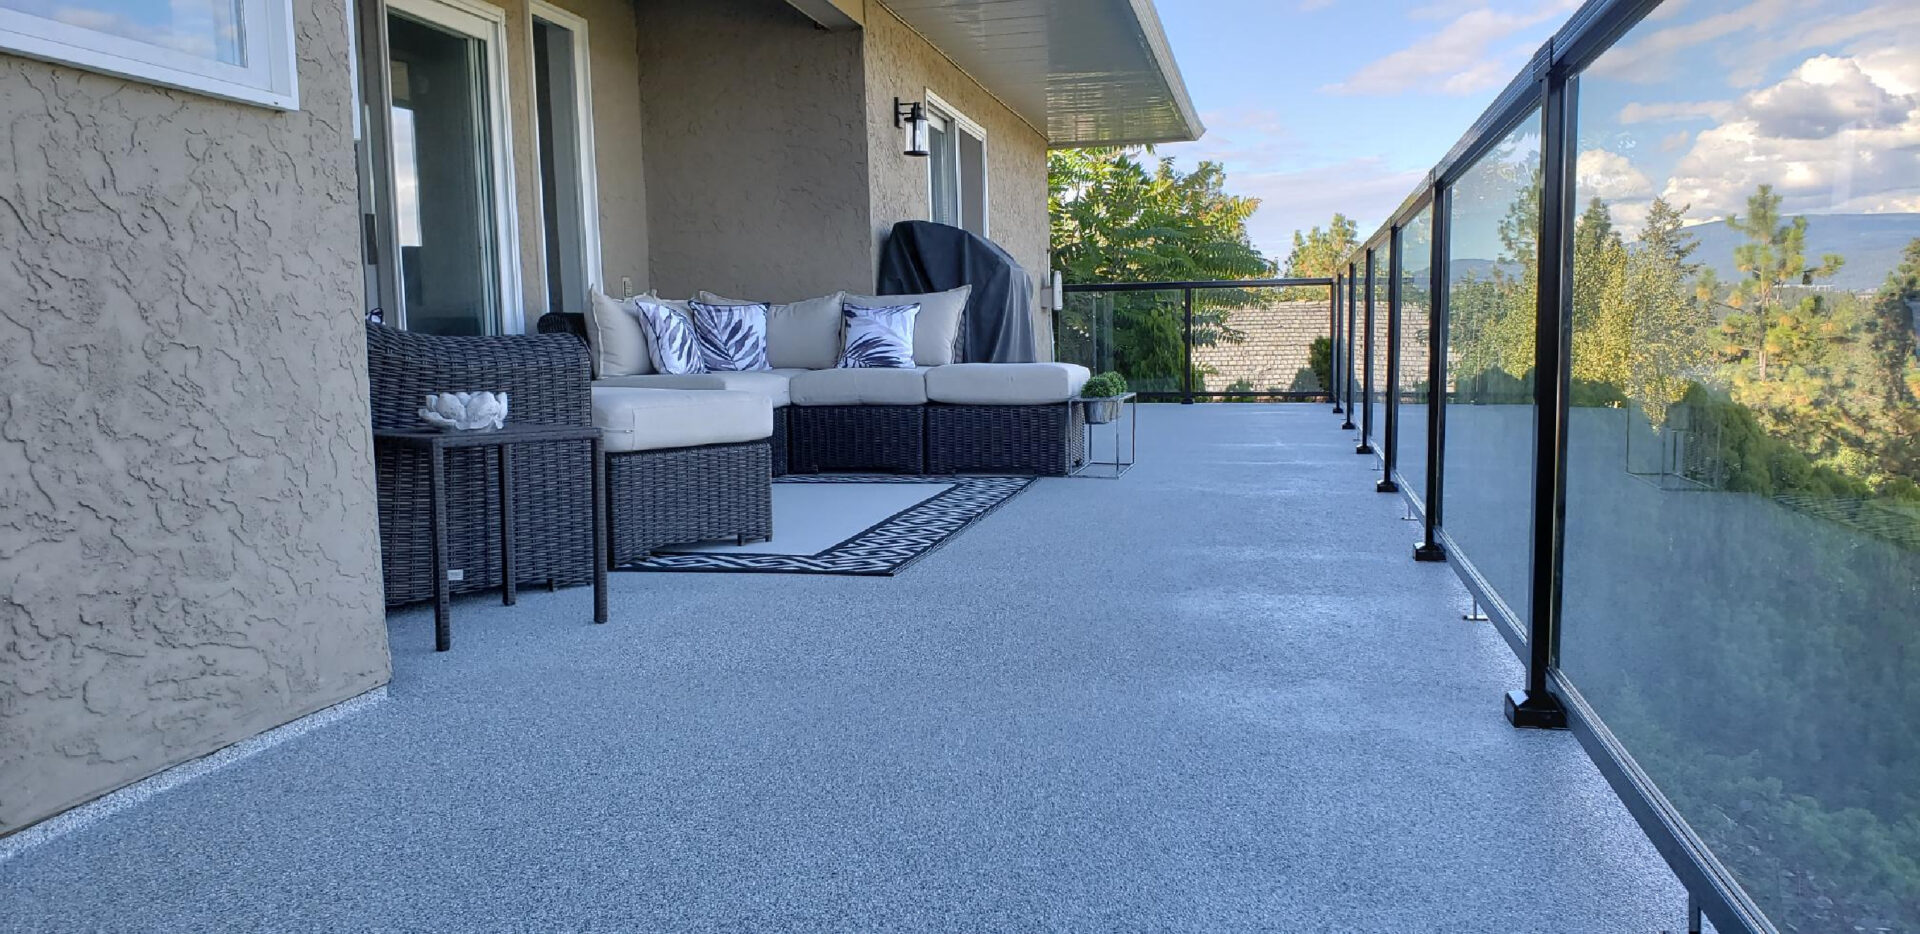 Calgary Home Featuring Flexstone Coated Deck for Superior Weather Resistance